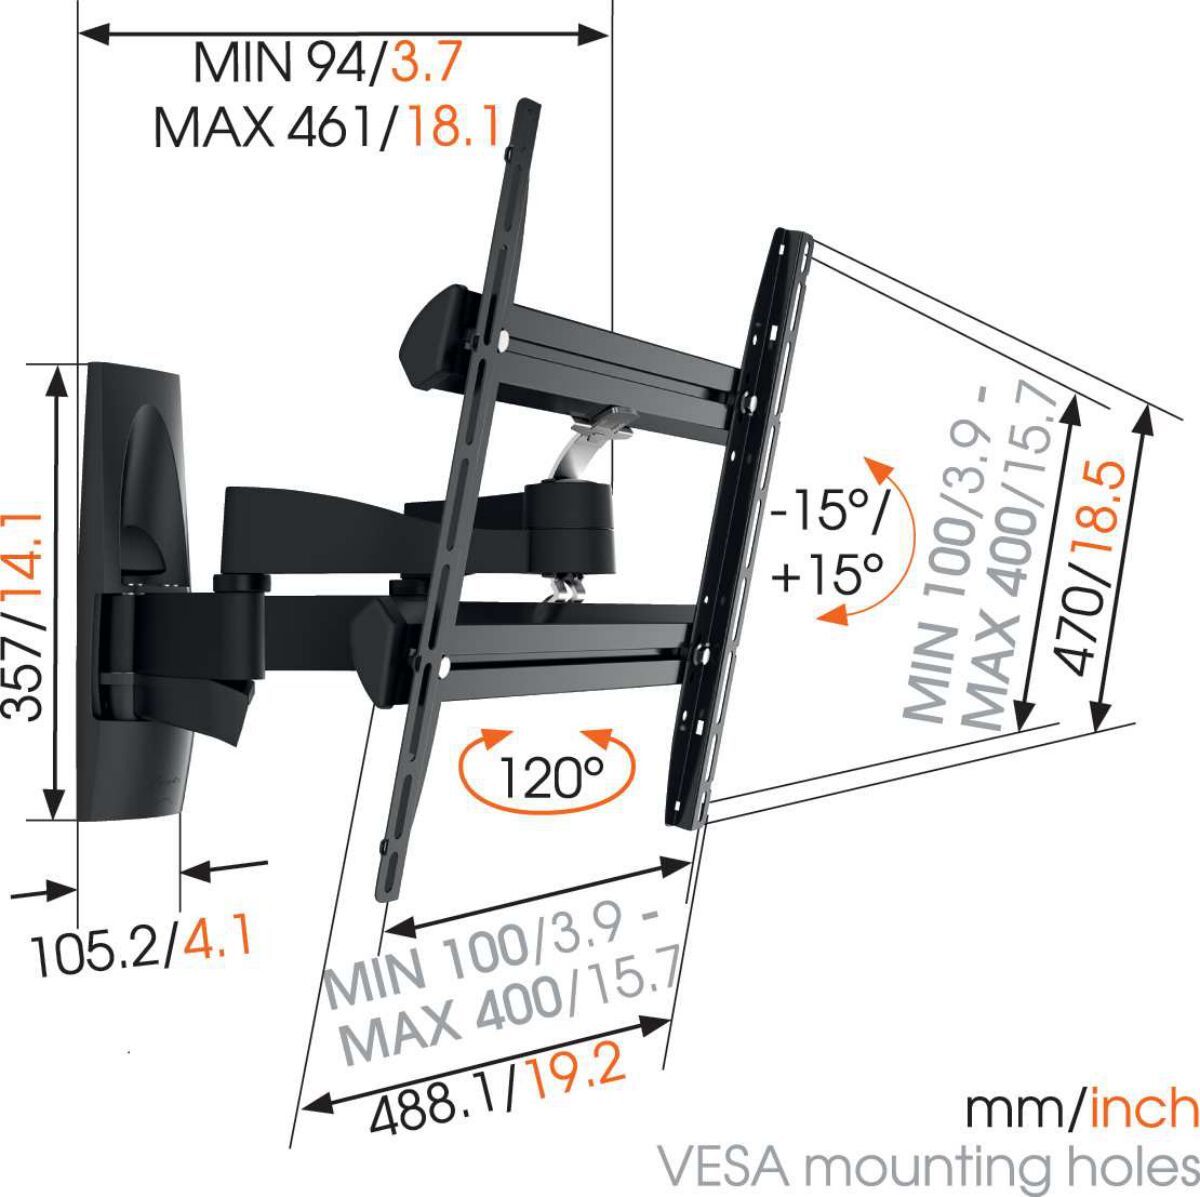 Vogel's WALL 3250 Full-Motion TV Wall Mount - Suitable for 32 up to 55 inch TVs - Forward and turning motion (up to 120°) - Tilt up to 15° - Dimensions